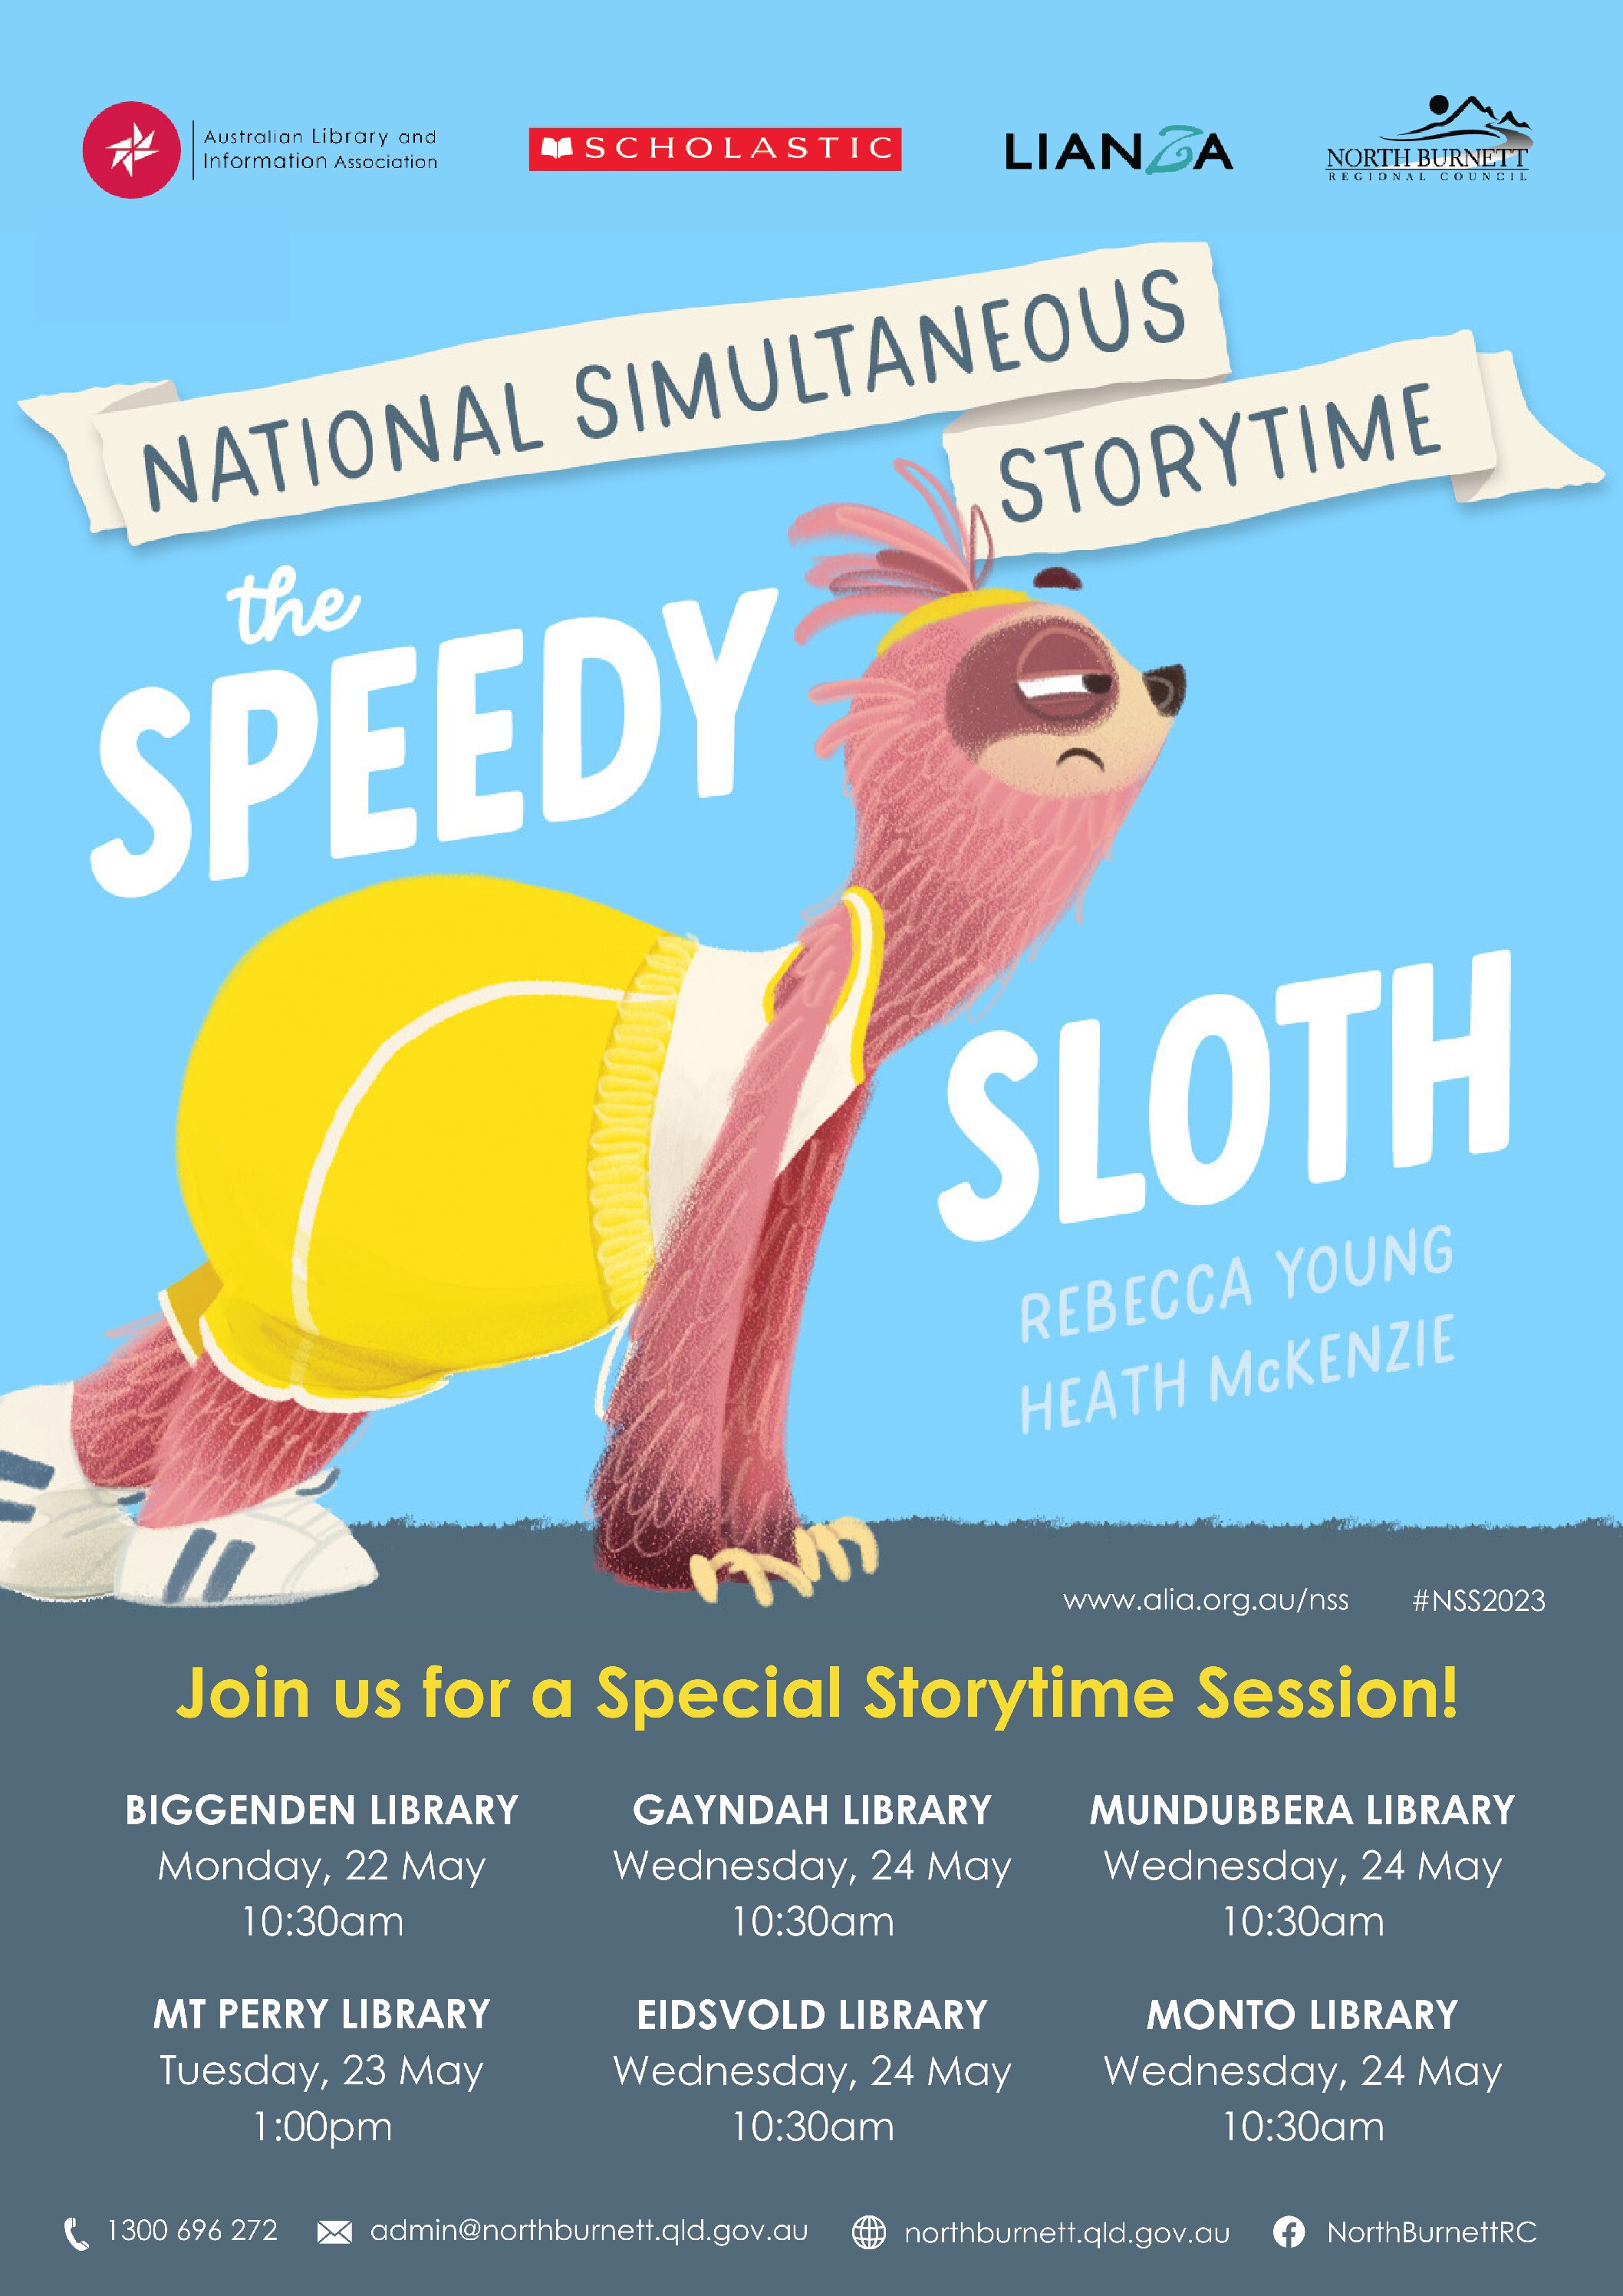 Monto – National Simultaneous Storytime